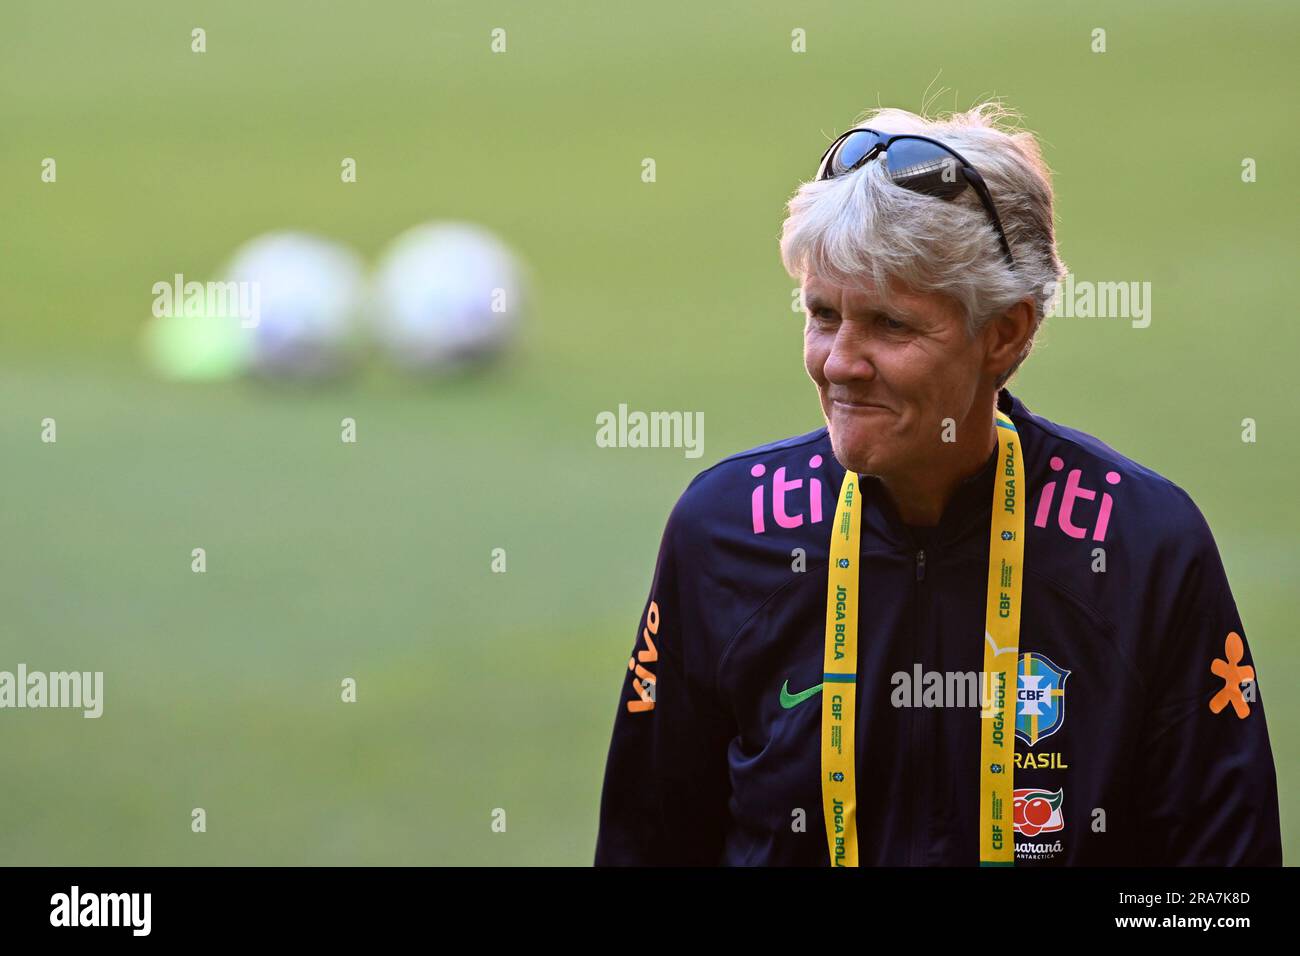 DF - BRASILIA - 07/01/2023 - BRASILIA, LULA PARTICIPATES IN THE WOMEN'S SOCCER TEAM TRAINING - Coach Pia Sundhage walks on the field before the start of a training session for the women's national soccer team, at the Mane Garrincha stadium, in Brasilia, Brazil, Saturday, July 1, 2023. The Brazilian women's national football team is scheduled to play a friendly against Chile on Sunday, ahead of their trip to the FIFA Women's World Cup. Photo: Mateus Bonomi/AGIF/Sipa USA Stock Photo